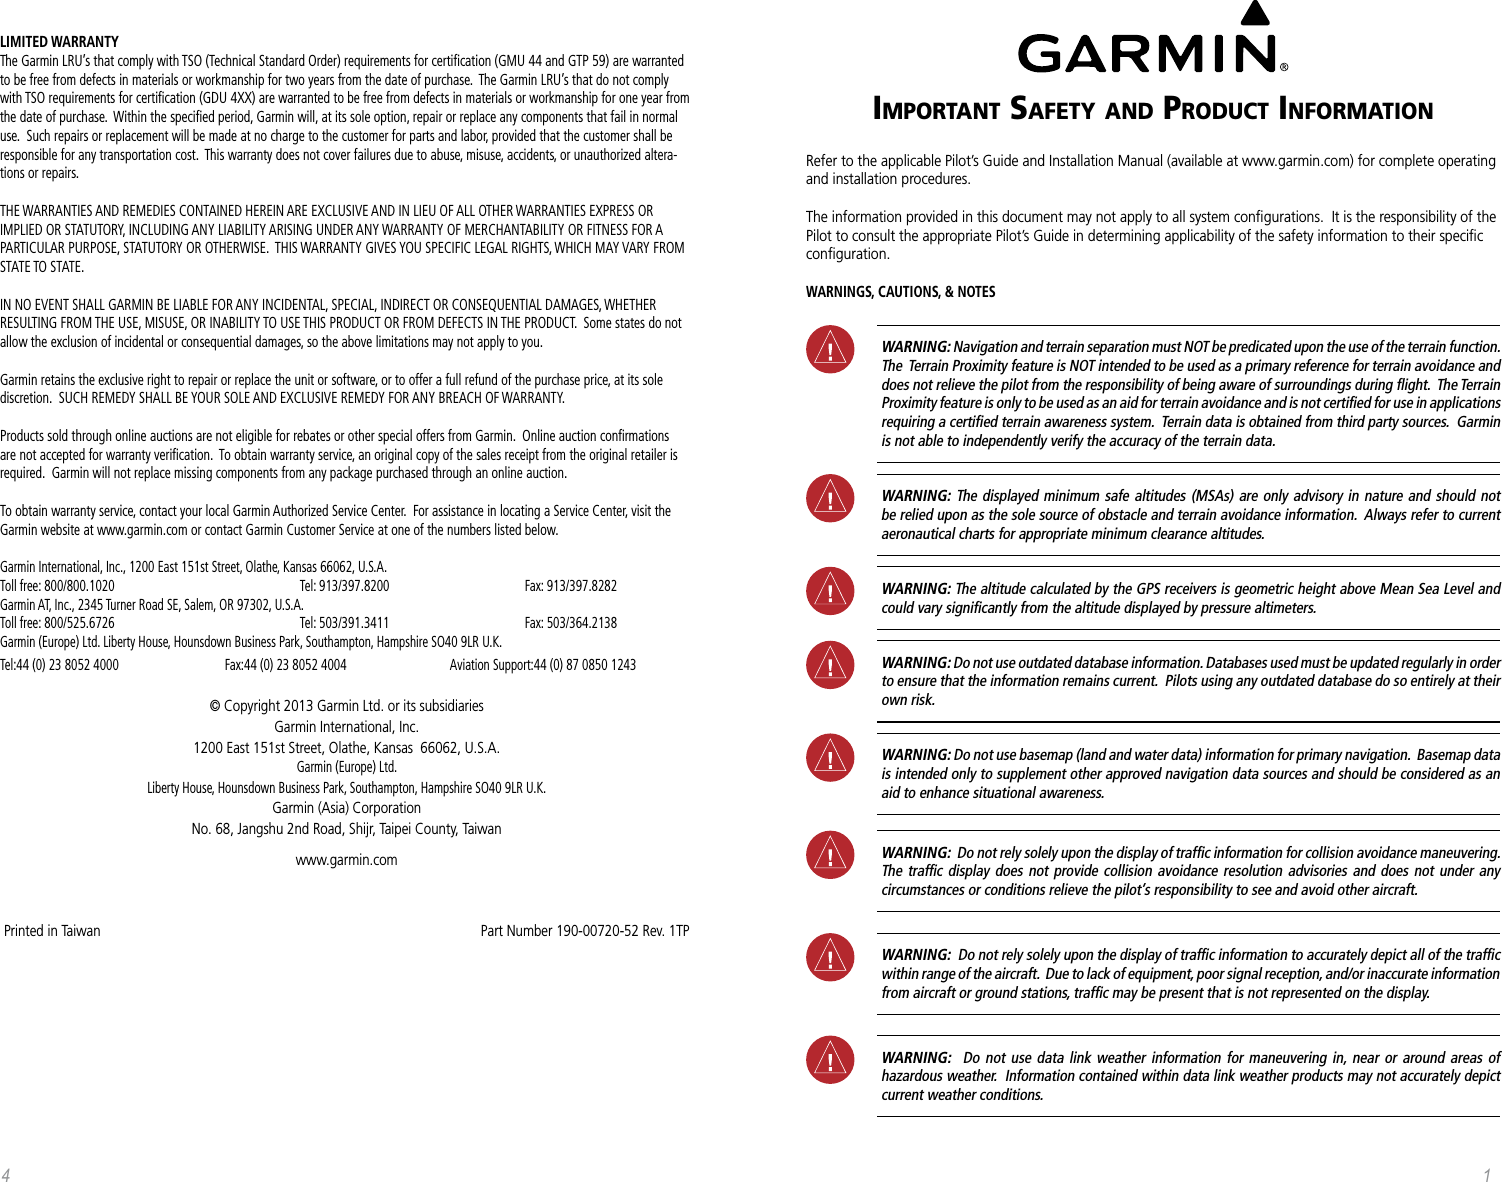 Important Safety and product InformatIonRefer to the applicable Pilot’s Guide and Installation Manual (available at www.garmin.com) for complete operating and installation procedures.The information provided in this document may not apply to all system conﬁgurations.  It is the responsibility of the Pilot to consult the appropriate Pilot’s Guide in determining applicability of the safety information to their speciﬁc conﬁguration.WARNINGS, CAUTIONS, &amp; NOTES WARNING: Navigation and terrain separation must NOT be predicated upon the use of the terrain function.  The  Terrain Proximity feature is NOT intended to be used as a primary reference for terrain avoidance and does not relieve the pilot from the responsibility of being aware of surroundings during ﬂight.  The Terrain Proximity feature is only to be used as an aid for terrain avoidance and is not certiﬁed for use in applications requiring a certiﬁed terrain awareness system.  Terrain data is obtained from third party sources.  Garmin is not able to independently verify the accuracy of the terrain data. WARNING: The displayed minimum safe altitudes (MSAs) are only advisory in nature and should not be relied upon as the sole source of obstacle and terrain avoidance information.  Always refer to current aeronautical charts for appropriate minimum clearance altitudes. WARNING: The altitude calculated by the GPS receivers is geometric height above Mean Sea Level and could vary signiﬁcantly from the altitude displayed by pressure altimeters. WARNING: Do not use outdated database information. Databases used must be updated regularly in order to ensure that the information remains current.  Pilots using any outdated database do so entirely at their own risk. WARNING: Do not use basemap (land and water data) information for primary navigation.  Basemap data is intended only to supplement other approved navigation data sources and should be considered as an aid to enhance situational awareness. WARNING:  Do not rely solely upon the display of trafﬁc information for collision avoidance maneuvering.  The trafﬁc display does not provide collision avoidance resolution advisories and does not under any circumstances or conditions relieve the pilot’s responsibility to see and avoid other aircraft.  WARNING:  Do not rely solely upon the display of trafﬁc information to accurately depict all of the trafﬁc within range of the aircraft.  Due to lack of equipment, poor signal reception, and/or inaccurate information from aircraft or ground stations, trafﬁc may be present that is not represented on the display.  WARNING:  Do not use data link weather information for maneuvering in, near or around areas of hazardous weather.  Information contained within data link weather products may not accurately depict current weather conditions.14LIMITED WARRANTY The Garmin LRU’s that comply with TSO (Technical Standard Order) requirements for certiﬁcation (GMU 44 and GTP 59) are warranted to be free from defects in materials or workmanship for two years from the date of purchase.  The Garmin LRU’s that do not comply with TSO requirements for certiﬁcation (GDU 4XX) are warranted to be free from defects in materials or workmanship for one year from the date of purchase.  Within the speciﬁed period, Garmin will, at its sole option, repair or replace any components that fail in normal use.  Such repairs or replacement will be made at no charge to the customer for parts and labor, provided that the customer shall be responsible for any transportation cost.  This warranty does not cover failures due to abuse, misuse, accidents, or unauthorized altera-tions or repairs.THE WARRANTIES AND REMEDIES CONTAINED HEREIN ARE EXCLUSIVE AND IN LIEU OF ALL OTHER WARRANTIES EXPRESS OR IMPLIED OR STATUTORY, INCLUDING ANY LIABILITY ARISING UNDER ANY WARRANTY OF MERCHANTABILITY OR FITNESS FOR A PARTICULAR PURPOSE, STATUTORY OR OTHERWISE.  THIS WARRANTY GIVES YOU SPECIFIC LEGAL RIGHTS, WHICH MAY VARY FROM STATE TO STATE.IN NO EVENT SHALL GARMIN BE LIABLE FOR ANY INCIDENTAL, SPECIAL, INDIRECT OR CONSEQUENTIAL DAMAGES, WHETHER RESULTING FROM THE USE, MISUSE, OR INABILITY TO USE THIS PRODUCT OR FROM DEFECTS IN THE PRODUCT.  Some states do not allow the exclusion of incidental or consequential damages, so the above limitations may not apply to you.Garmin retains the exclusive right to repair or replace the unit or software, or to offer a full refund of the purchase price, at its sole discretion.  SUCH REMEDY SHALL BE YOUR SOLE AND EXCLUSIVE REMEDY FOR ANY BREACH OF WARRANTY.Products sold through online auctions are not eligible for rebates or other special offers from Garmin.  Online auction conﬁrmations are not accepted for warranty veriﬁcation.  To obtain warranty service, an original copy of the sales receipt from the original retailer is required.  Garmin will not replace missing components from any package purchased through an online auction.To obtain warranty service, contact your local Garmin Authorized Service Center.  For assistance in locating a Service Center, visit the Garmin website at www.garmin.com or contact Garmin Customer Service at one of the numbers listed below.Garmin International, Inc., 1200 East 151st Street, Olathe, Kansas 66062, U.S.A. Toll free: 800/800.1020      Tel: 913/397.8200    Fax: 913/397.8282 Garmin AT, Inc., 2345 Turner Road SE, Salem, OR 97302, U.S.A. Toll free: 800/525.6726      Tel: 503/391.3411    Fax: 503/364.2138 Garmin (Europe) Ltd. Liberty House, Hounsdown Business Park, Southampton, Hampshire SO40 9LR U.K.Tel:44 (0) 23 8052 4000    Fax:44 (0) 23 8052 4004    Aviation Support:44 (0) 87 0850 1243© Copyright 2013 Garmin Ltd. or its subsidiariesGarmin International, Inc. 1200 East 151st Street, Olathe, Kansas  66062, U.S.A. Garmin (Europe) Ltd. Liberty House, Hounsdown Business Park, Southampton, Hampshire SO40 9LR U.K. Garmin (Asia) Corporation No. 68, Jangshu 2nd Road, Shijr, Taipei County, Taiwanwww.garmin.comPrinted in Taiwan                                                                                                       Part Number 190-00720-52 Rev. 1TP